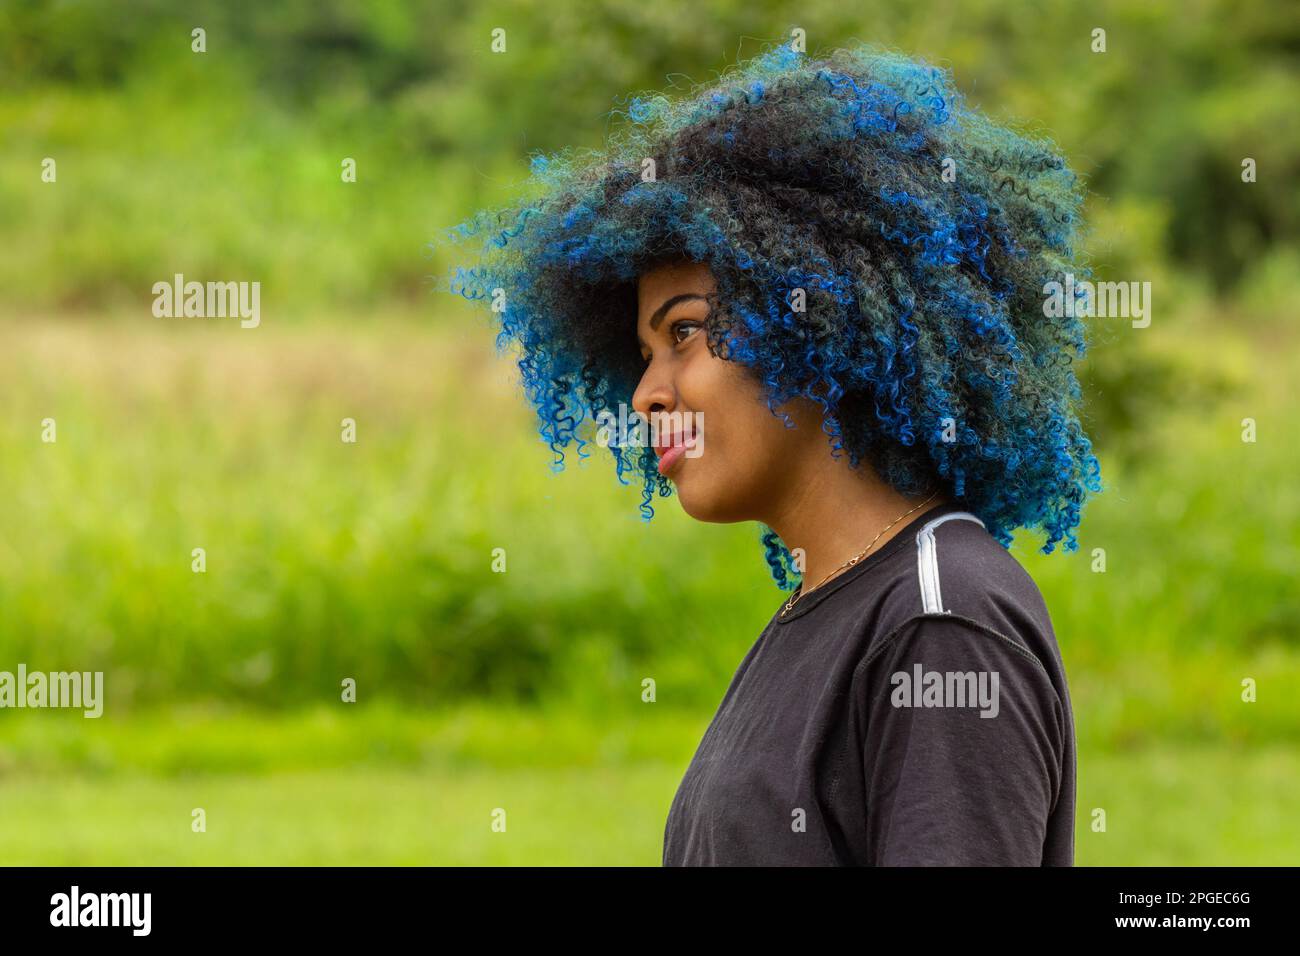 Goiania, Goias, Brazil – March 20, 2023: Photo of a young black woman with afro hair, dyed blue, with a slight smile on her face, in profile with blur Stock Photo